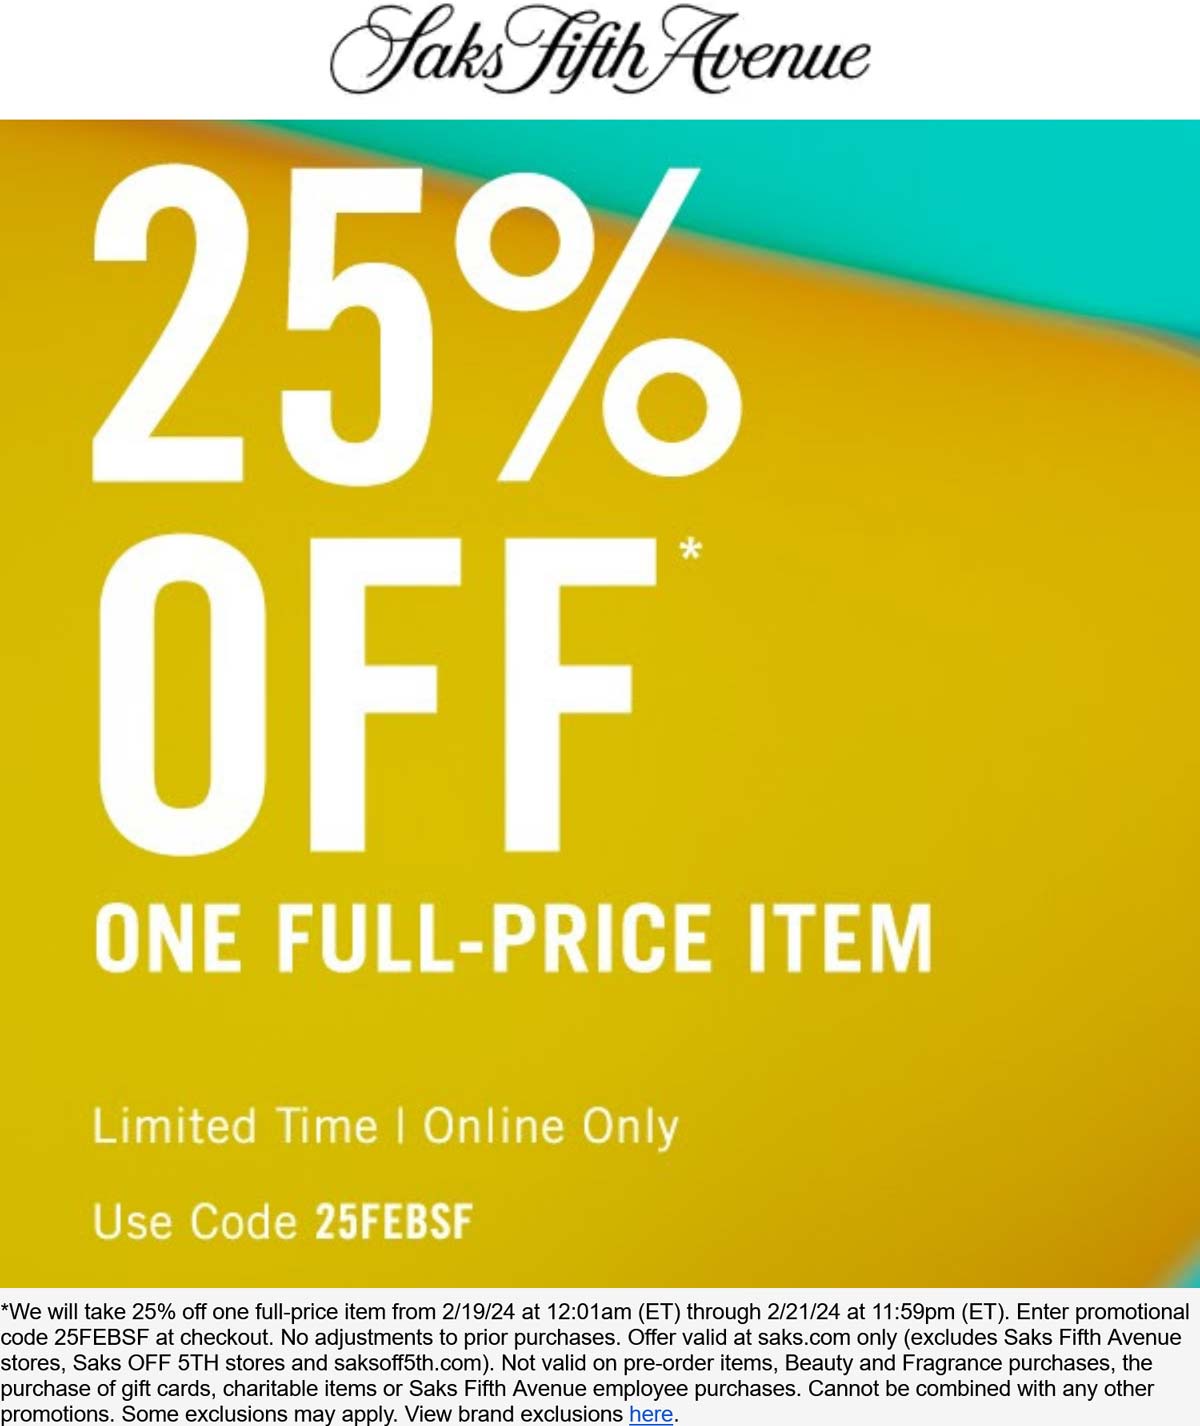 Saks Fifth Avenue stores Coupon  25% off a single item today at Saks Fifth Avenue via promo code 25FEBSF #saksfifthavenue 